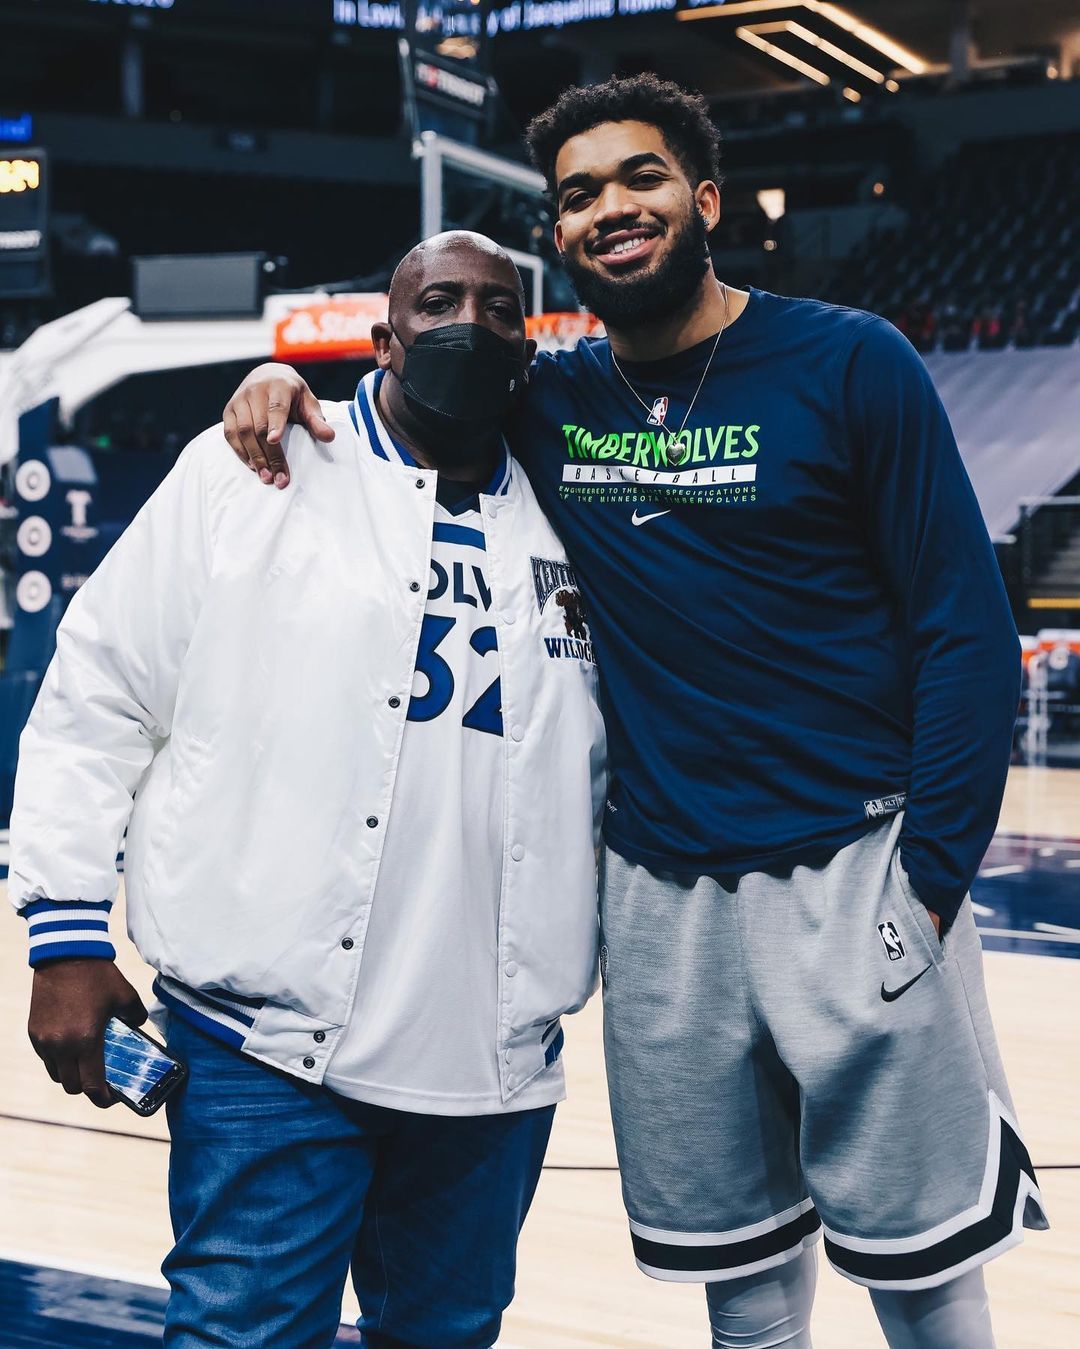 Karl-Anthony Towns on court with his dad.